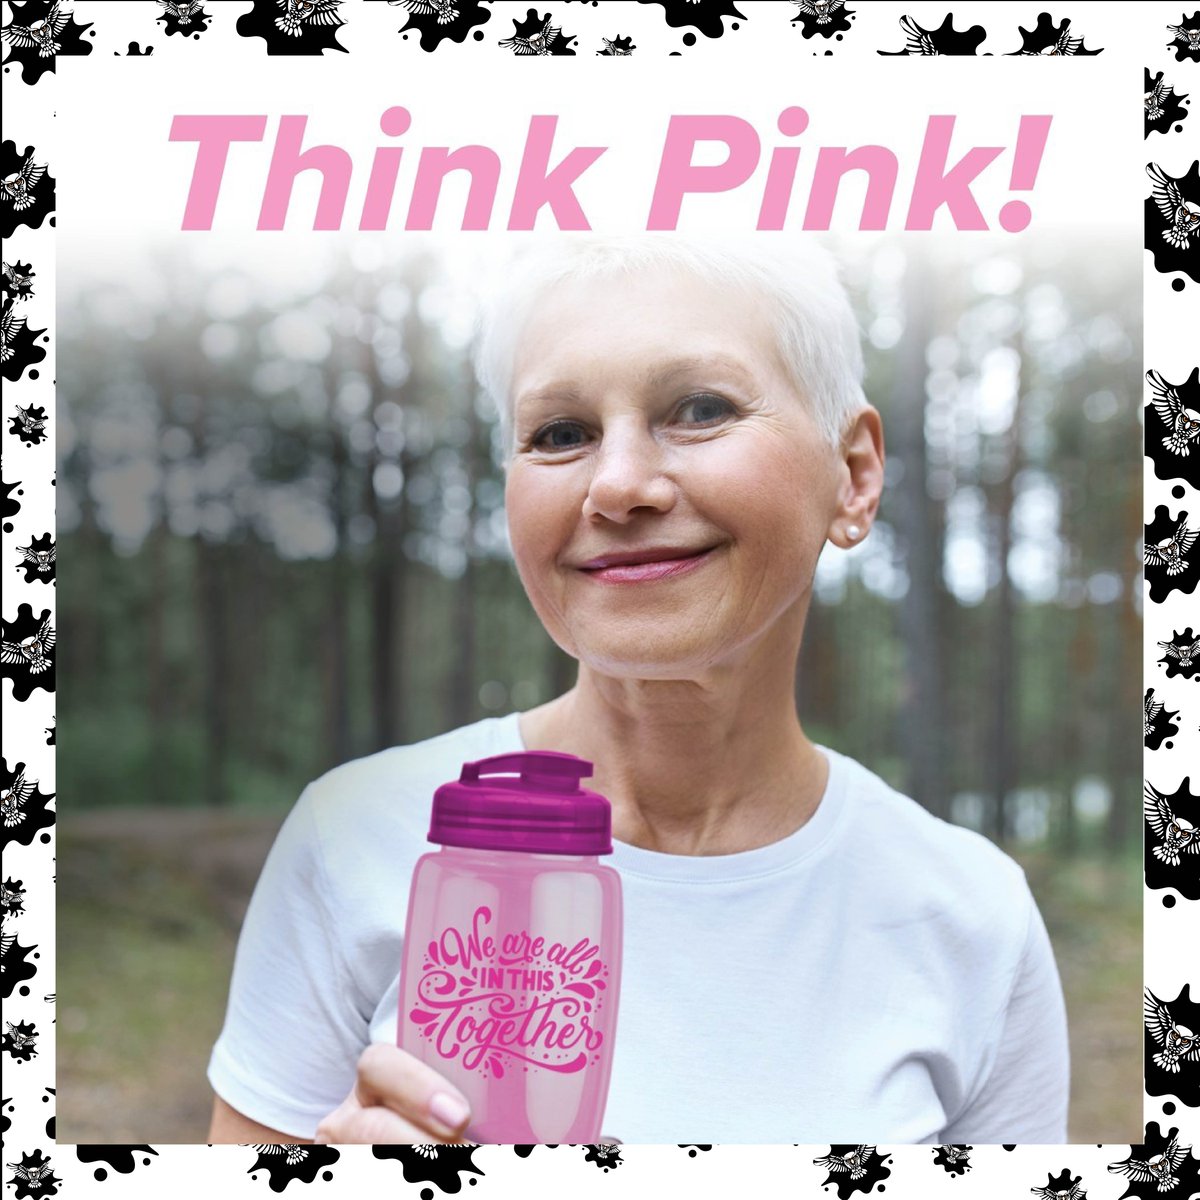 October is Breast Cancer Awareness Month. Show your support as a brand by getting your orders in. Let's make a difference! #BreastCancerAwareness #PinkRibbon #Fundraising #SupportACause https://t.co/gK5l23D8sL